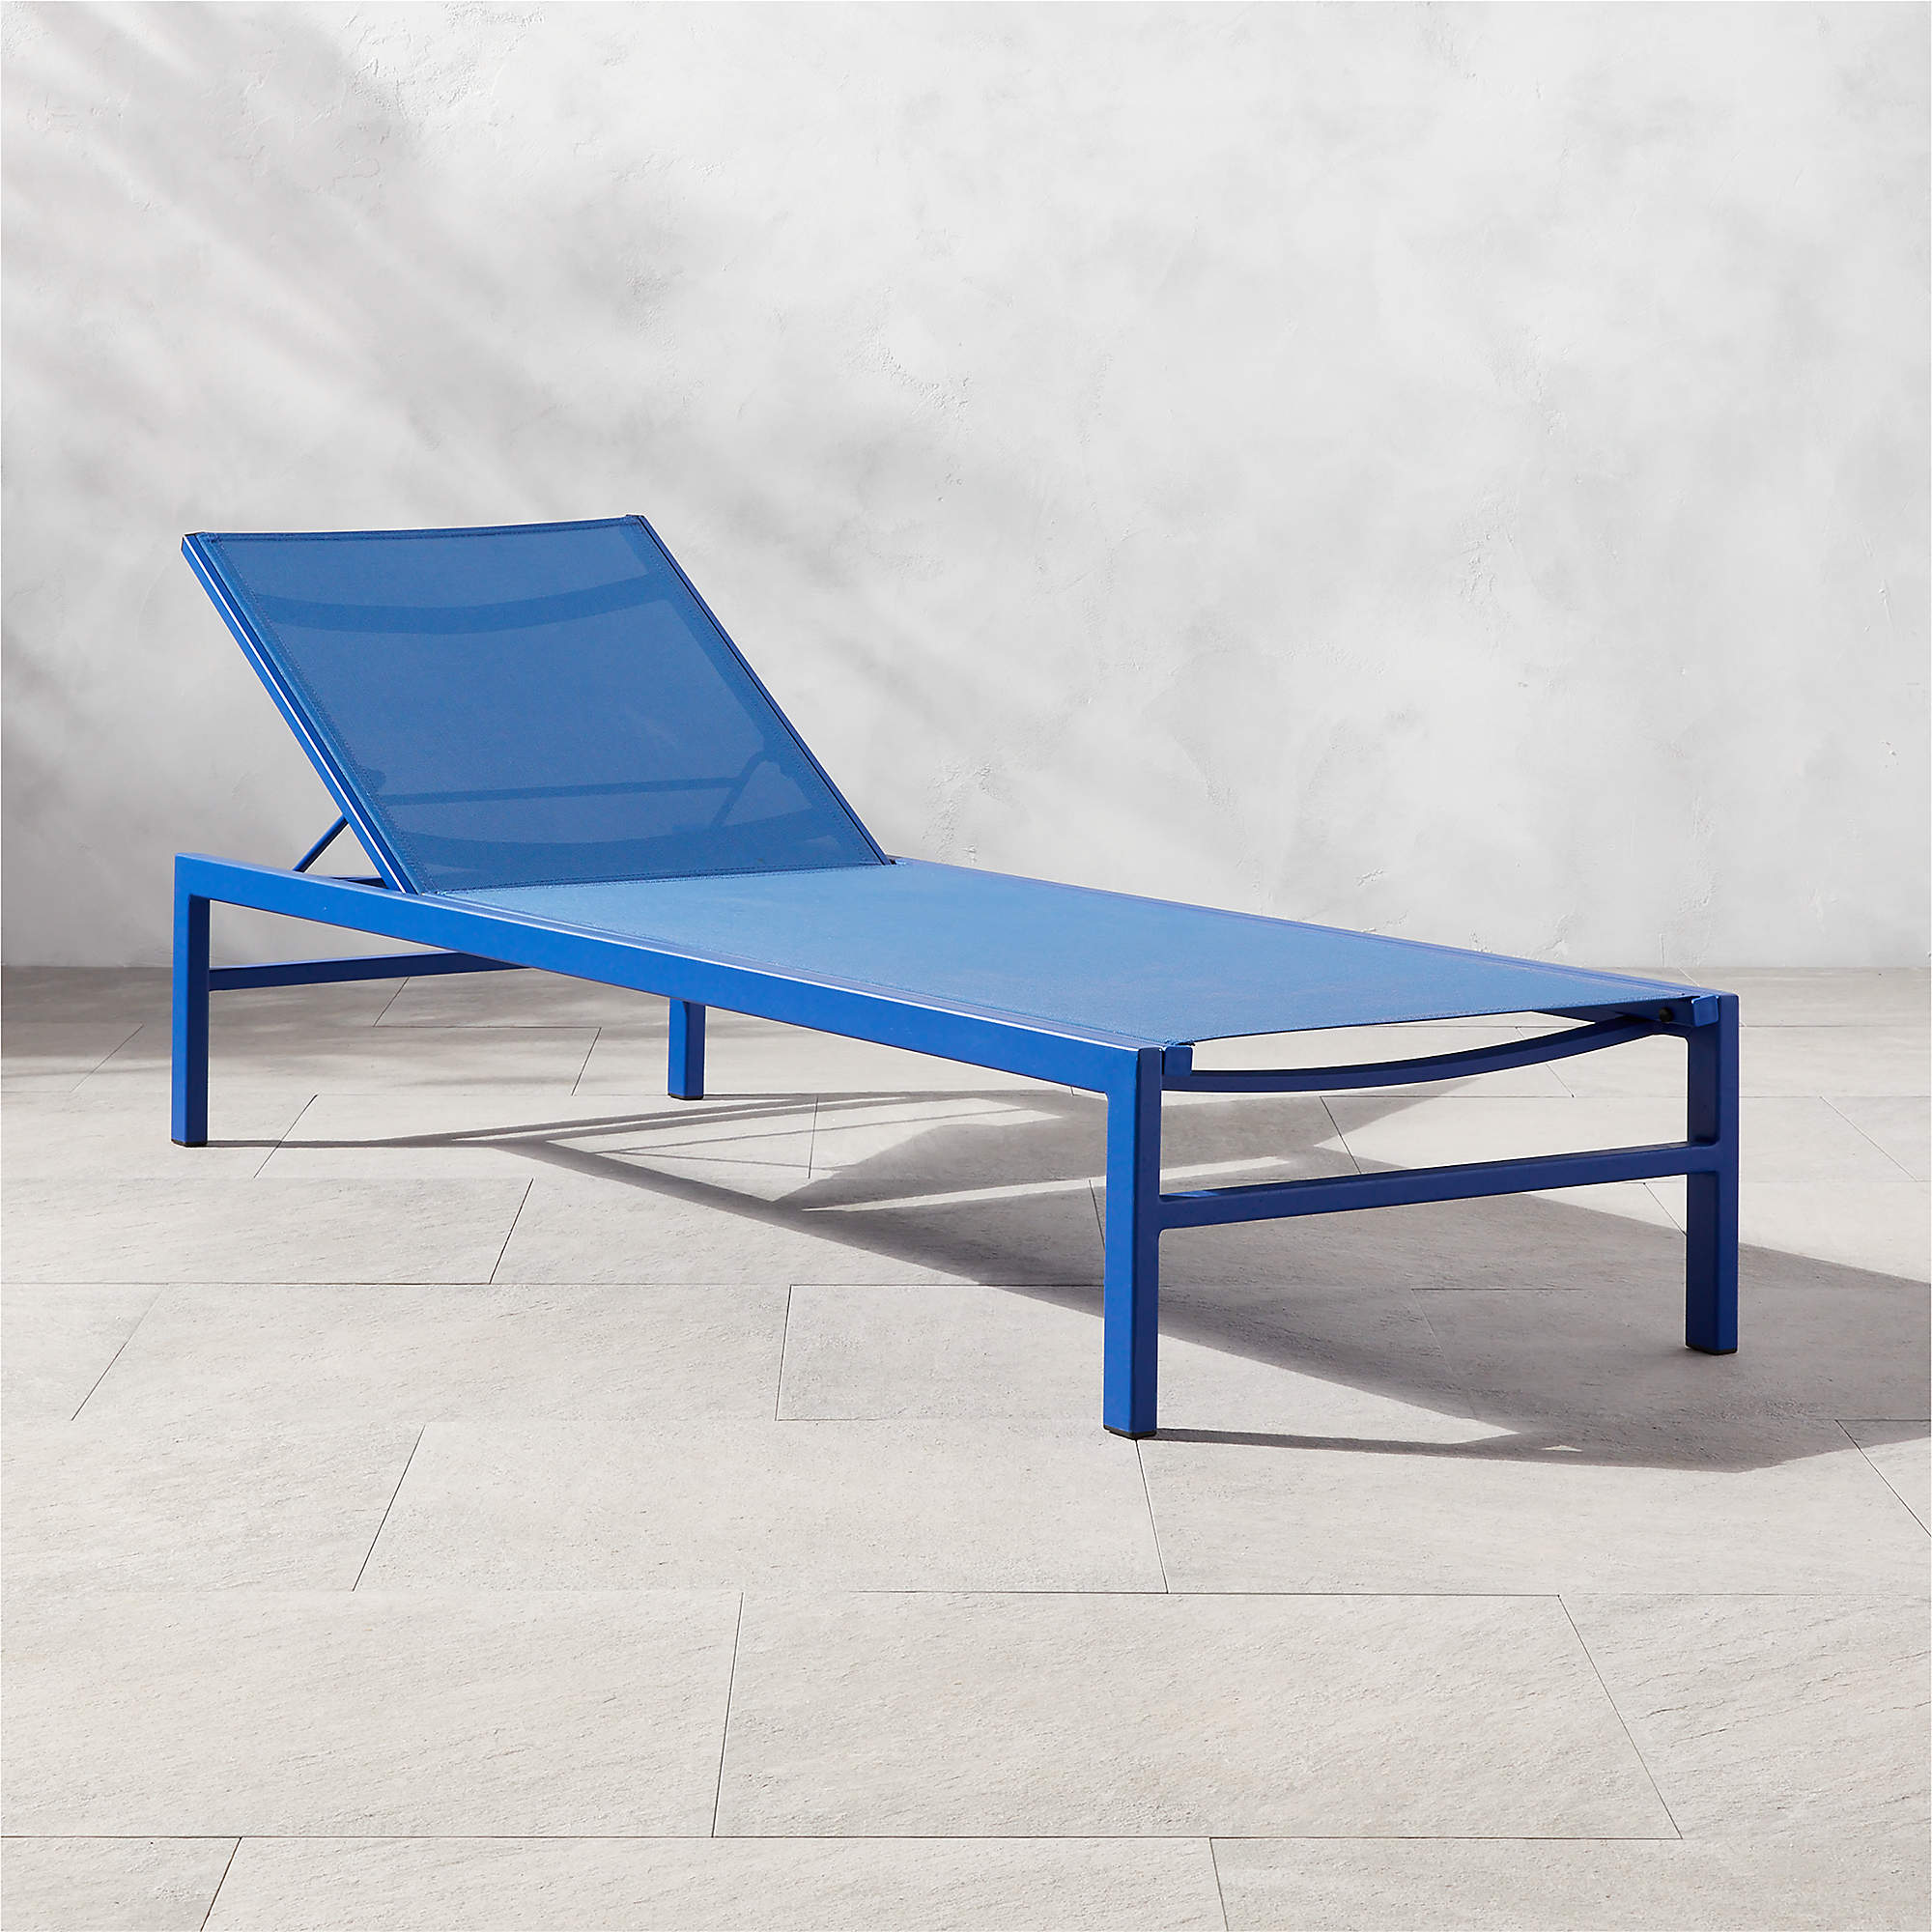 CB2’s New Outdoor Furniture Collab Is a Refreshing Break From Greige